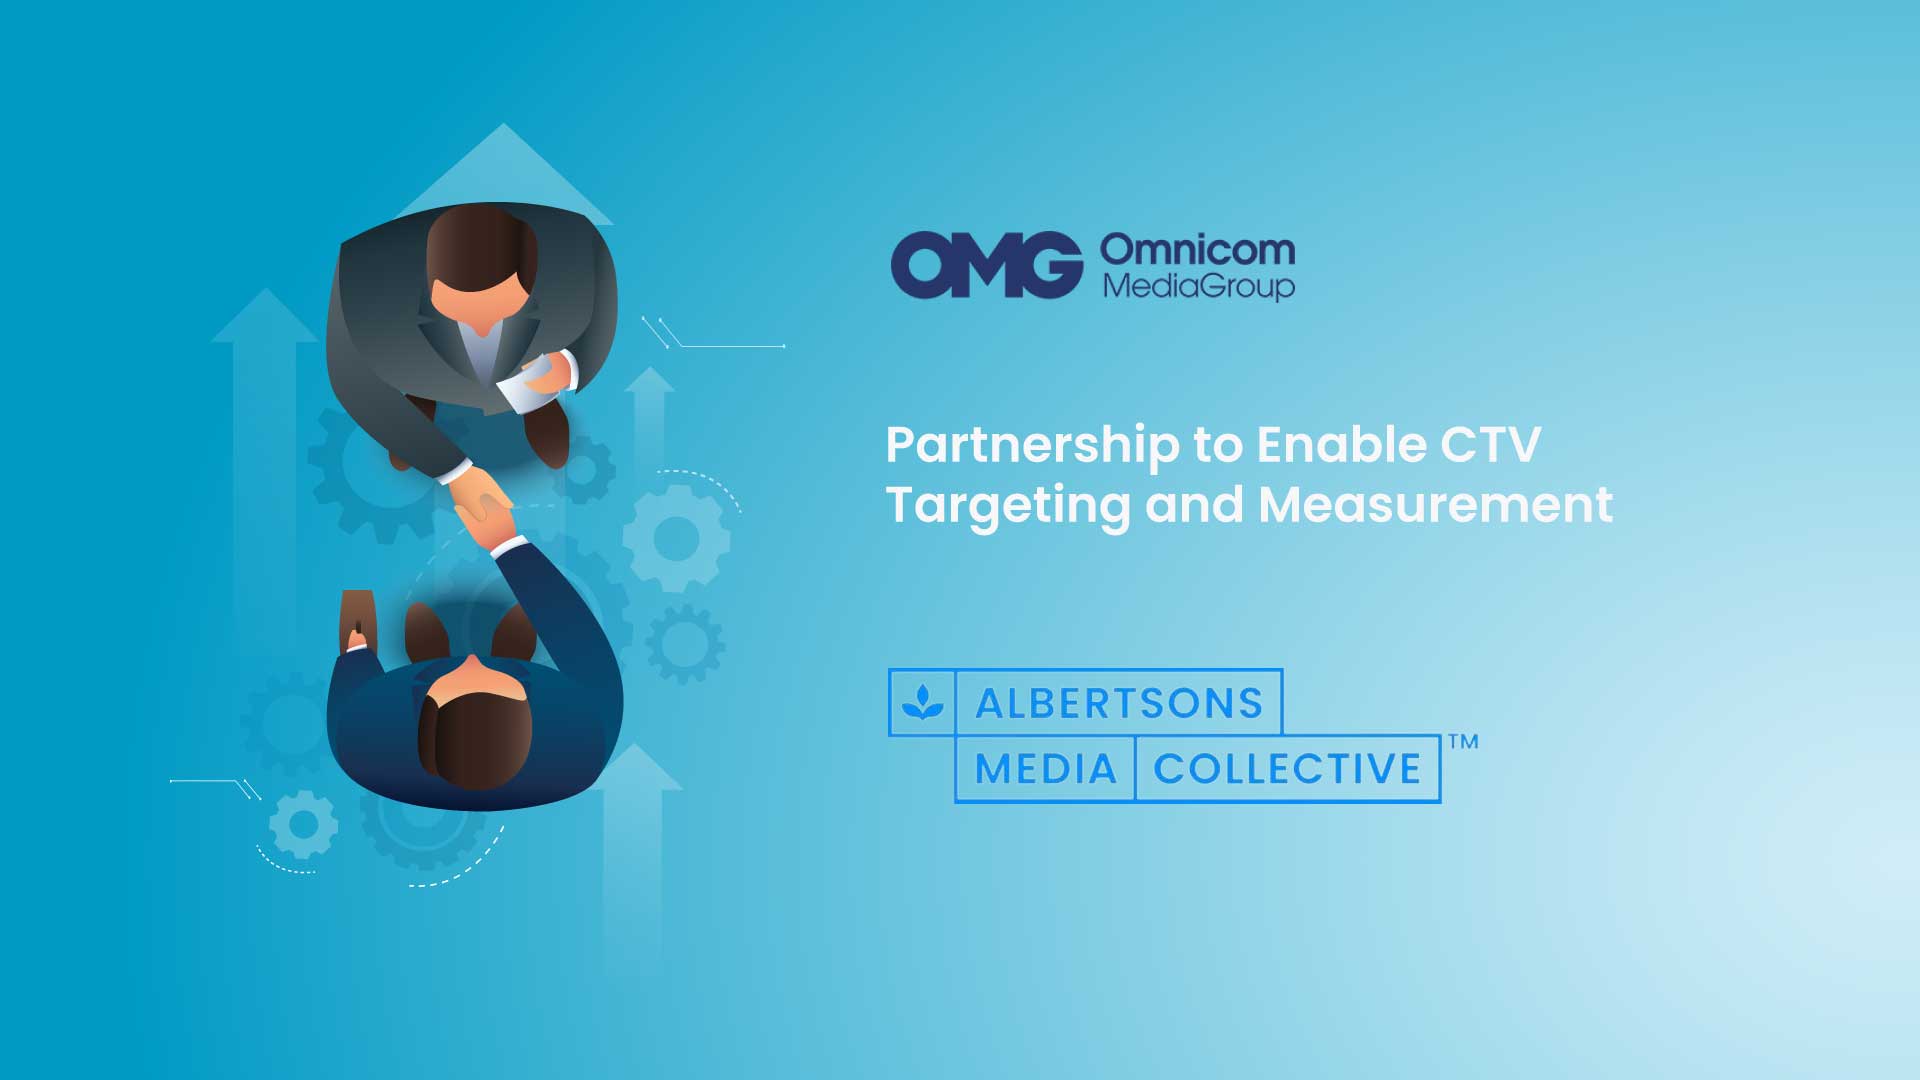 OMNICOM MEDIA GROUP AND ALBERTSONS MEDIA COLLECTIVE PARTNER TO ENABLE CTV TARGETING AND MEASUREMENT